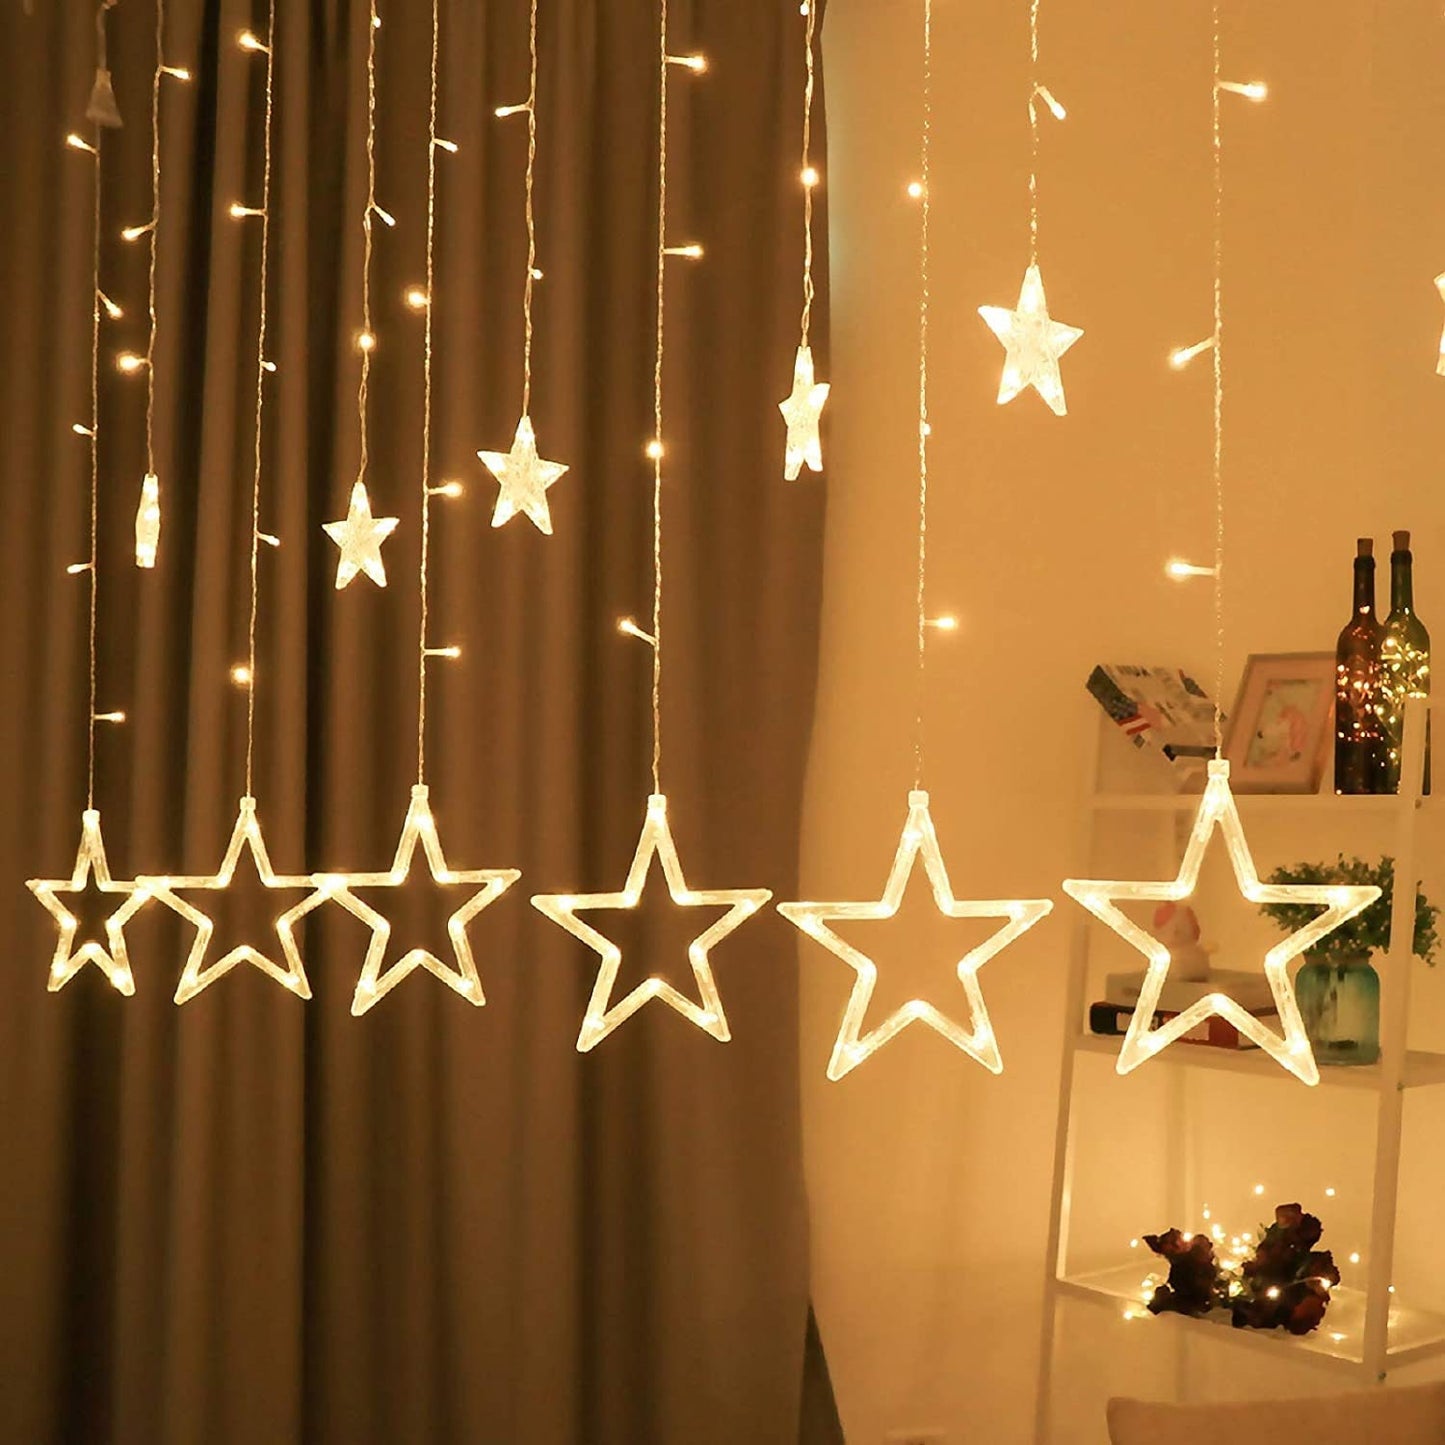 LED Fairy String Lights with 12 Stars for Curtain Bedroom, Wedding, Party, Window, Wall, Christmas Decorations Gift Warm White